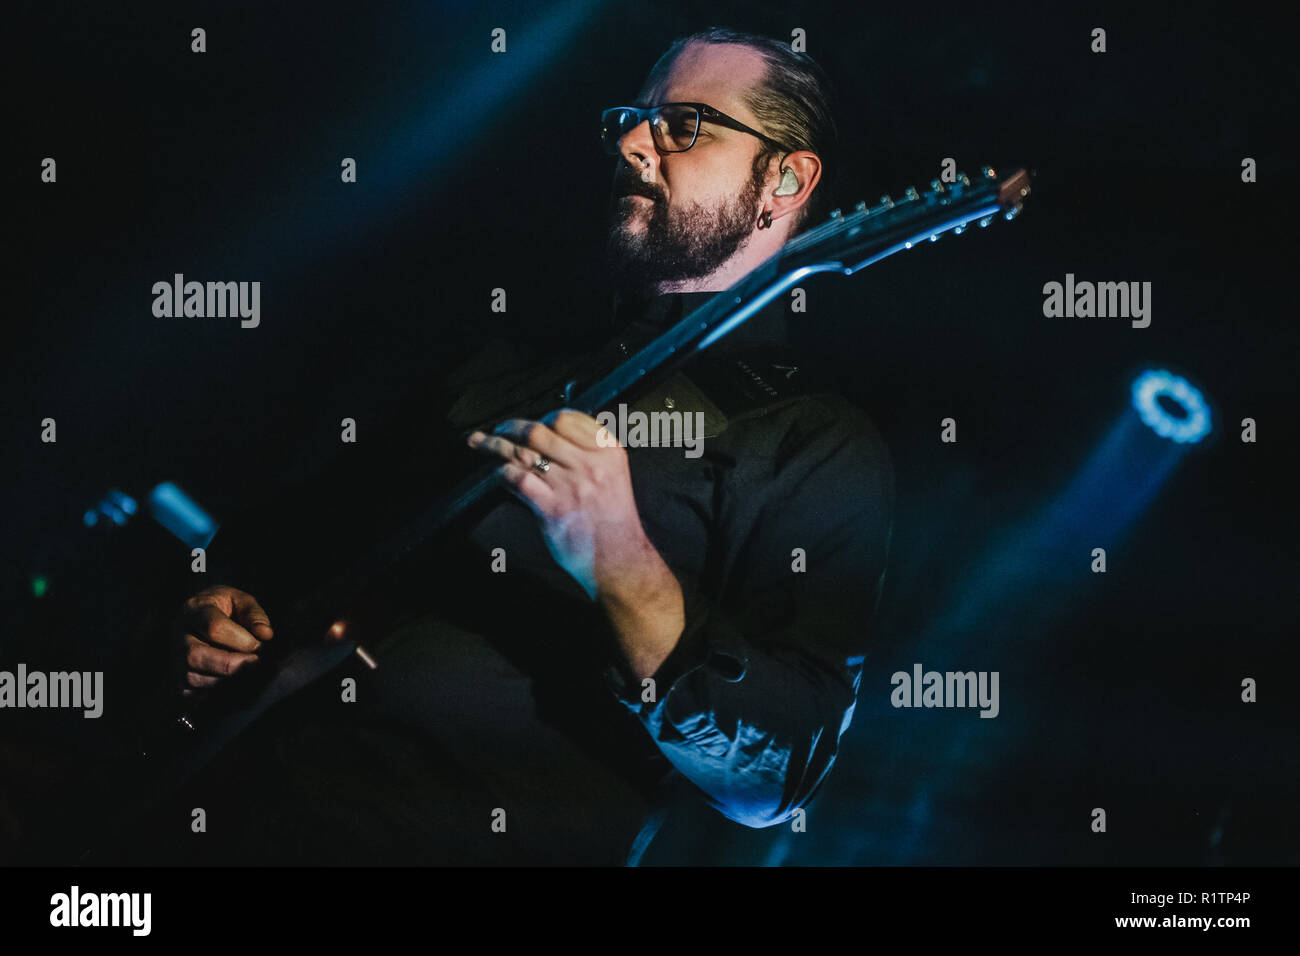 Wroclaw, Poland. 13th Nov, 2018. Vegard Sverre Tveitan (Ihsahn) - he  performed in Wroclaw. Legend of metal music - founder of the legendary  group Emperor promoted his solo album. Credit: Krzysztof Zatycki/Pacific